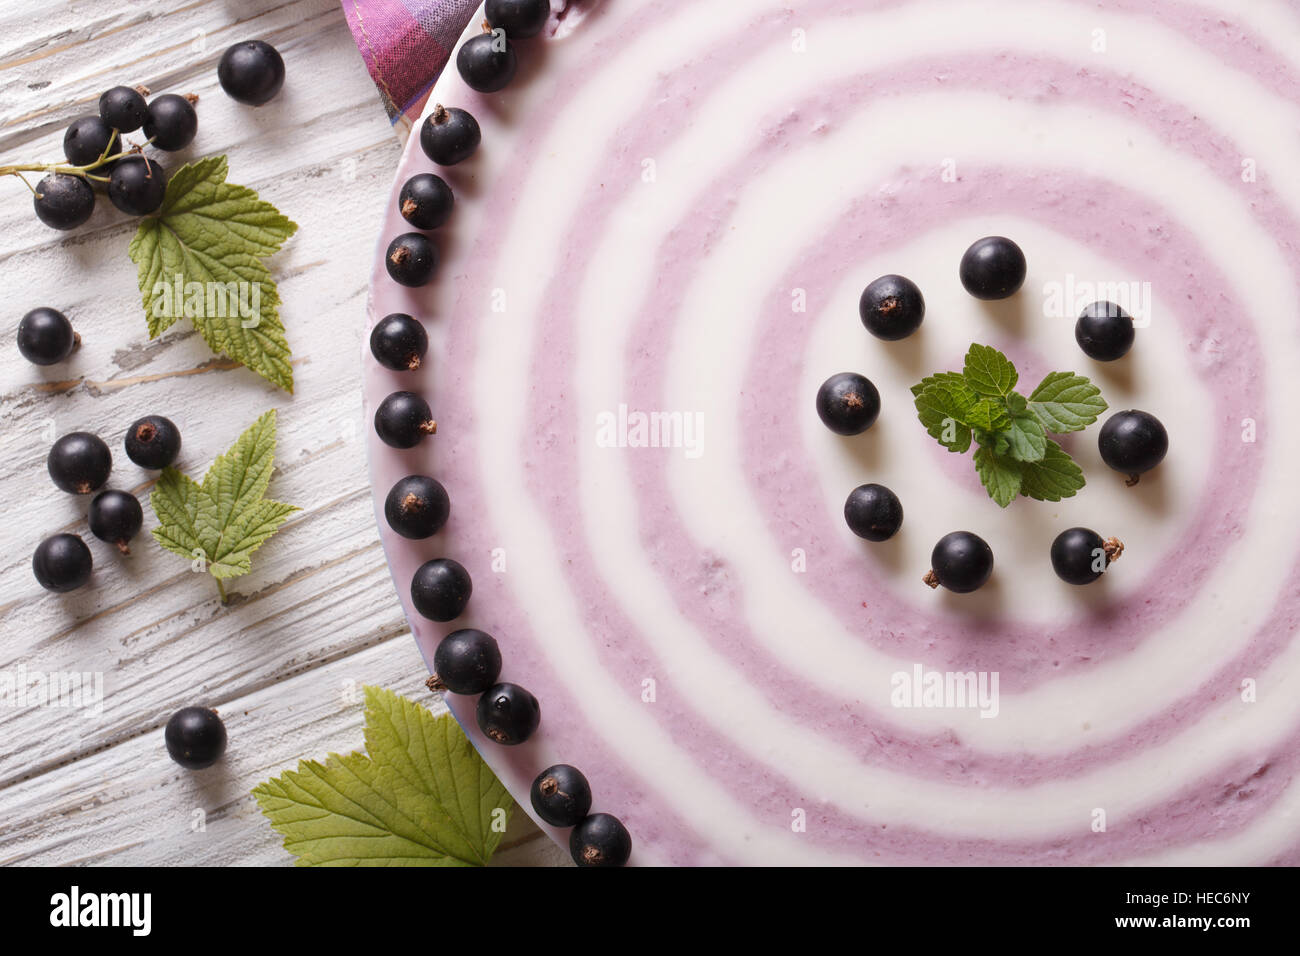 striped currant cheesecake close-up on the table. horizontal view from above Stock Photo